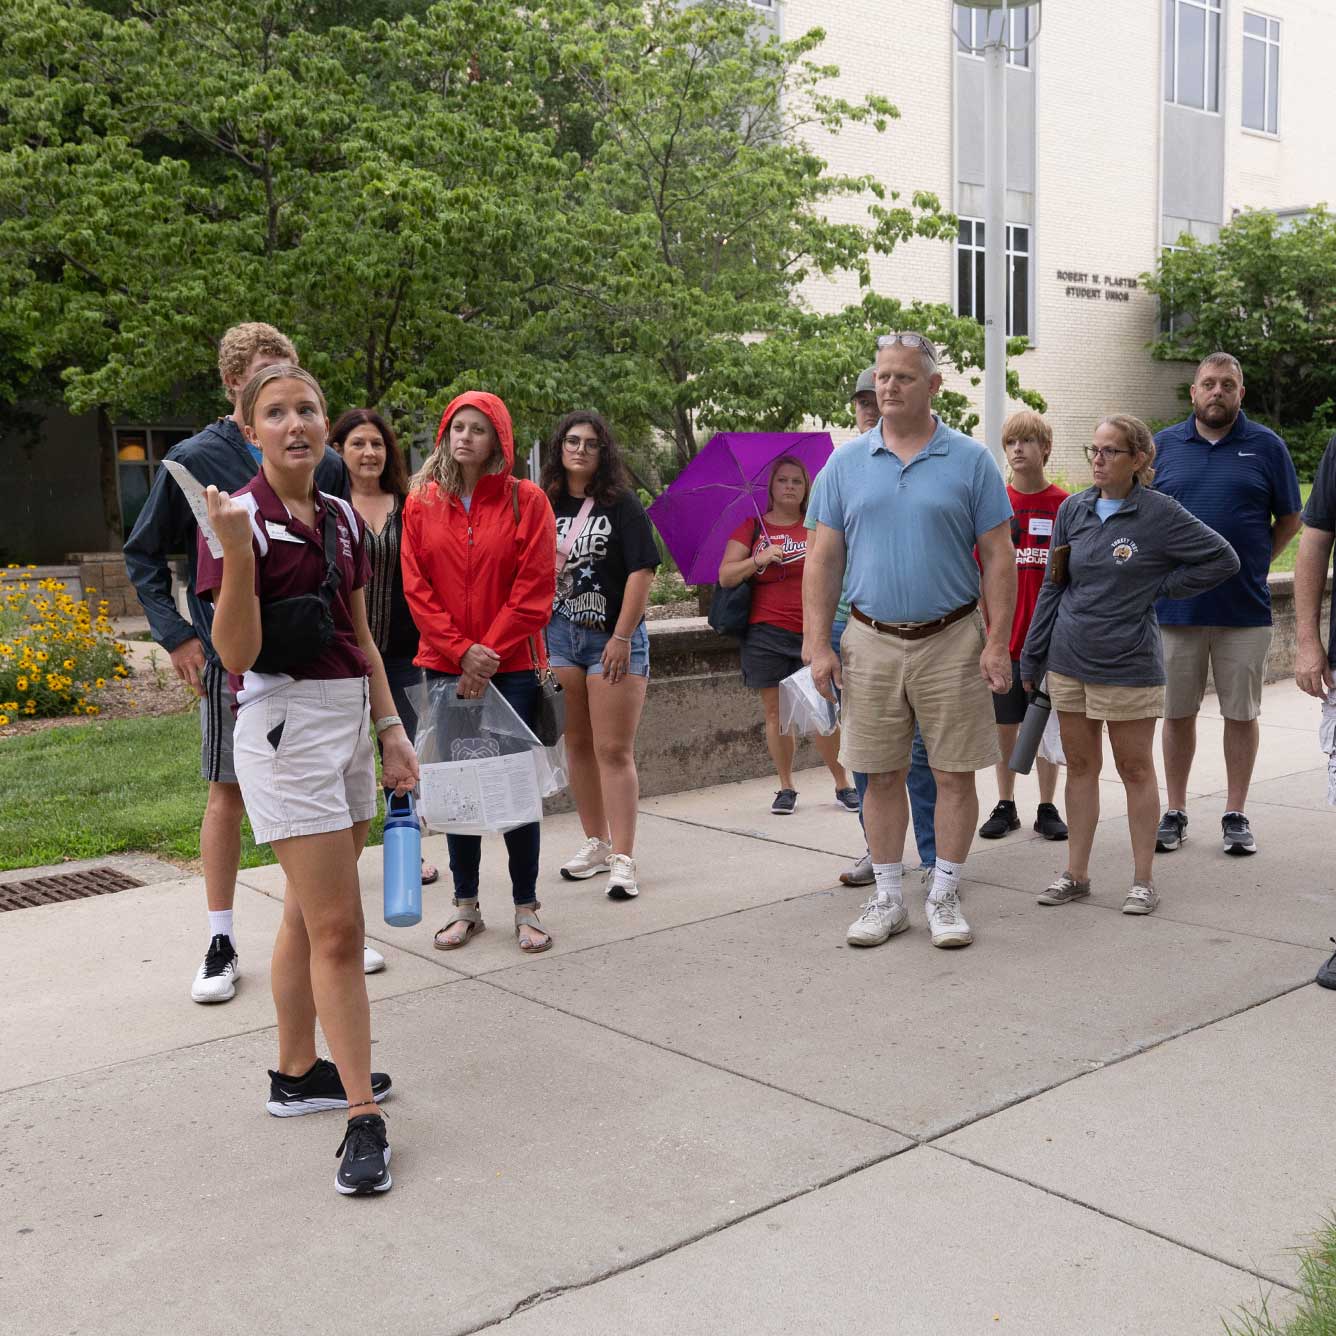 An MSU tour guide provides potential students and families with information about the MSU campus.